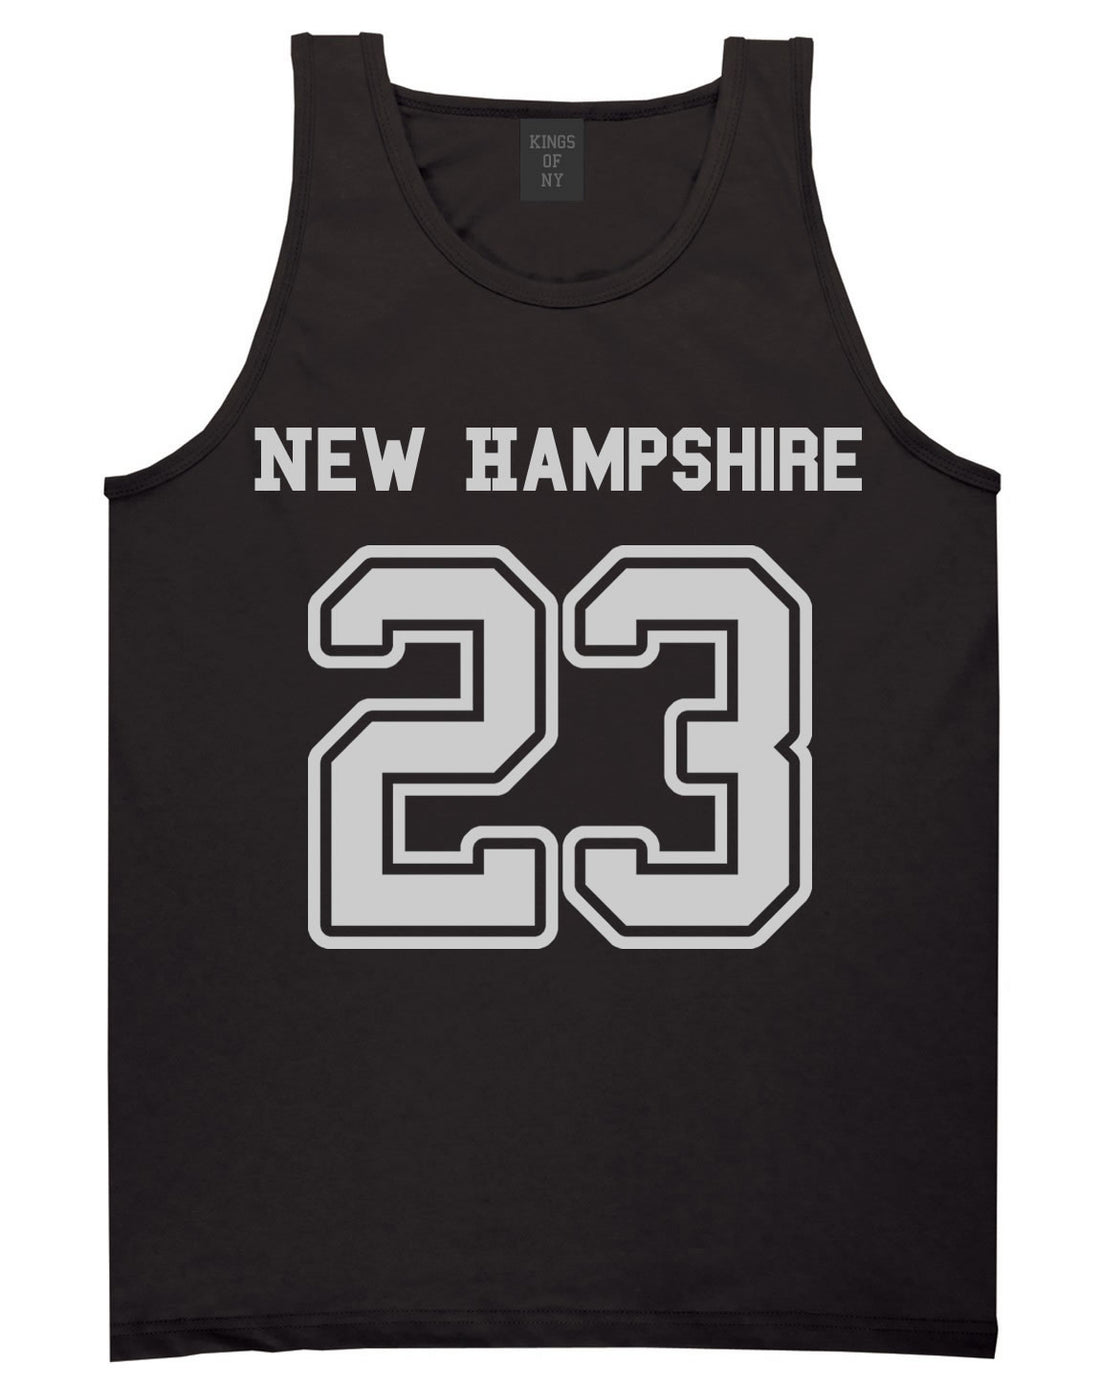 Sport Style New Hampshire 23 Team State Jersey Mens Tank Top By Kings Of NY